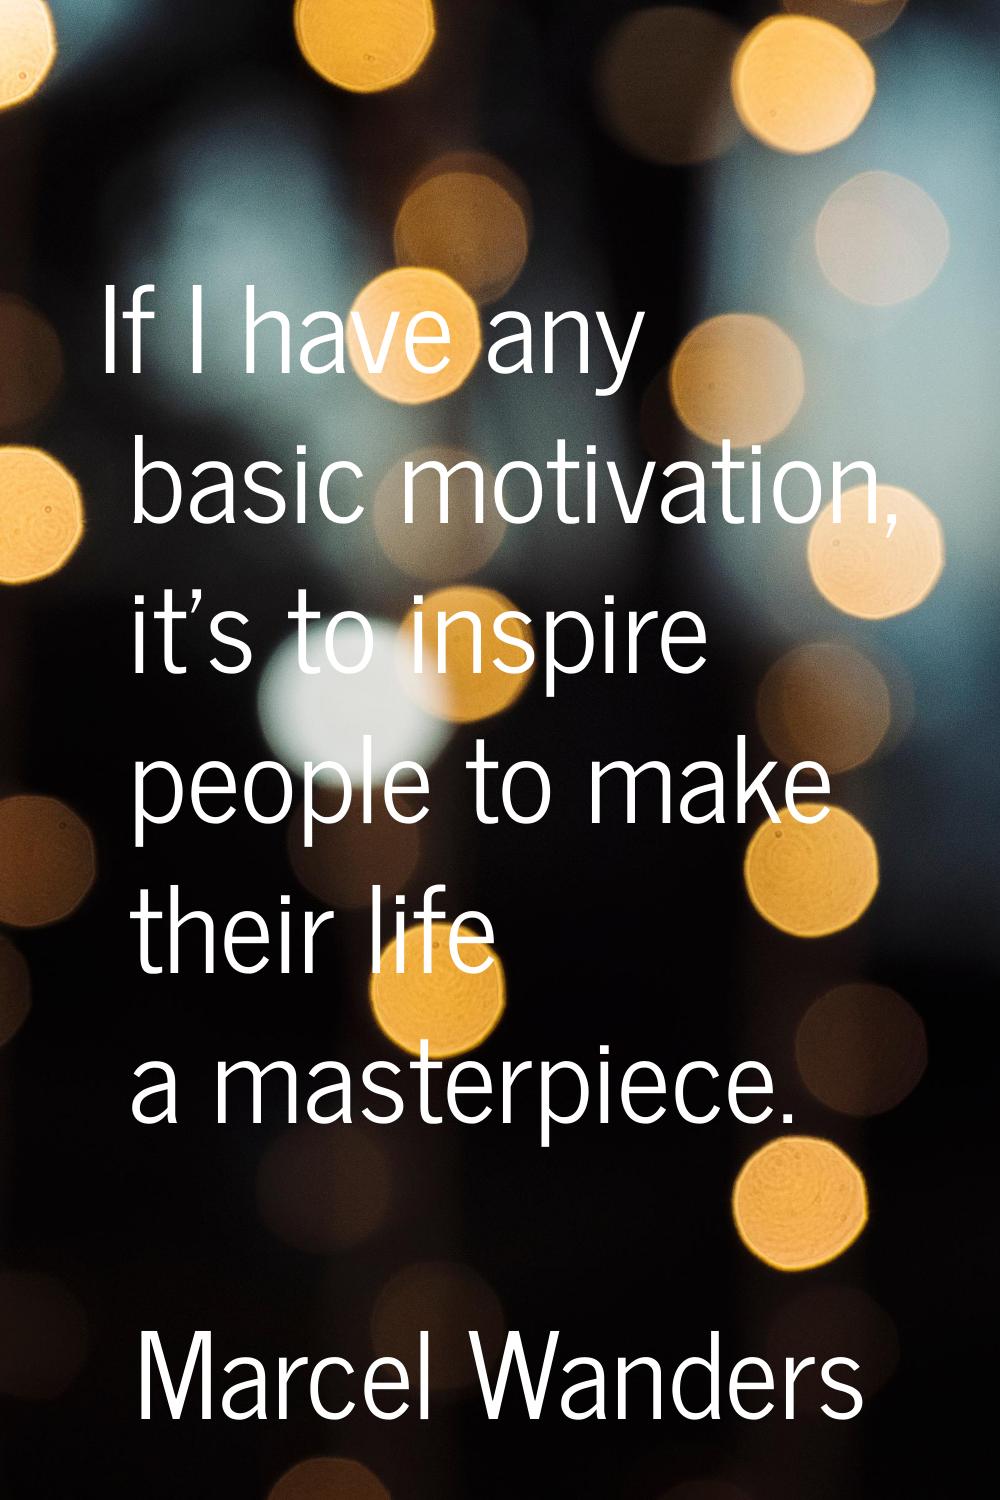 If I have any basic motivation, it's to inspire people to make their life a masterpiece.